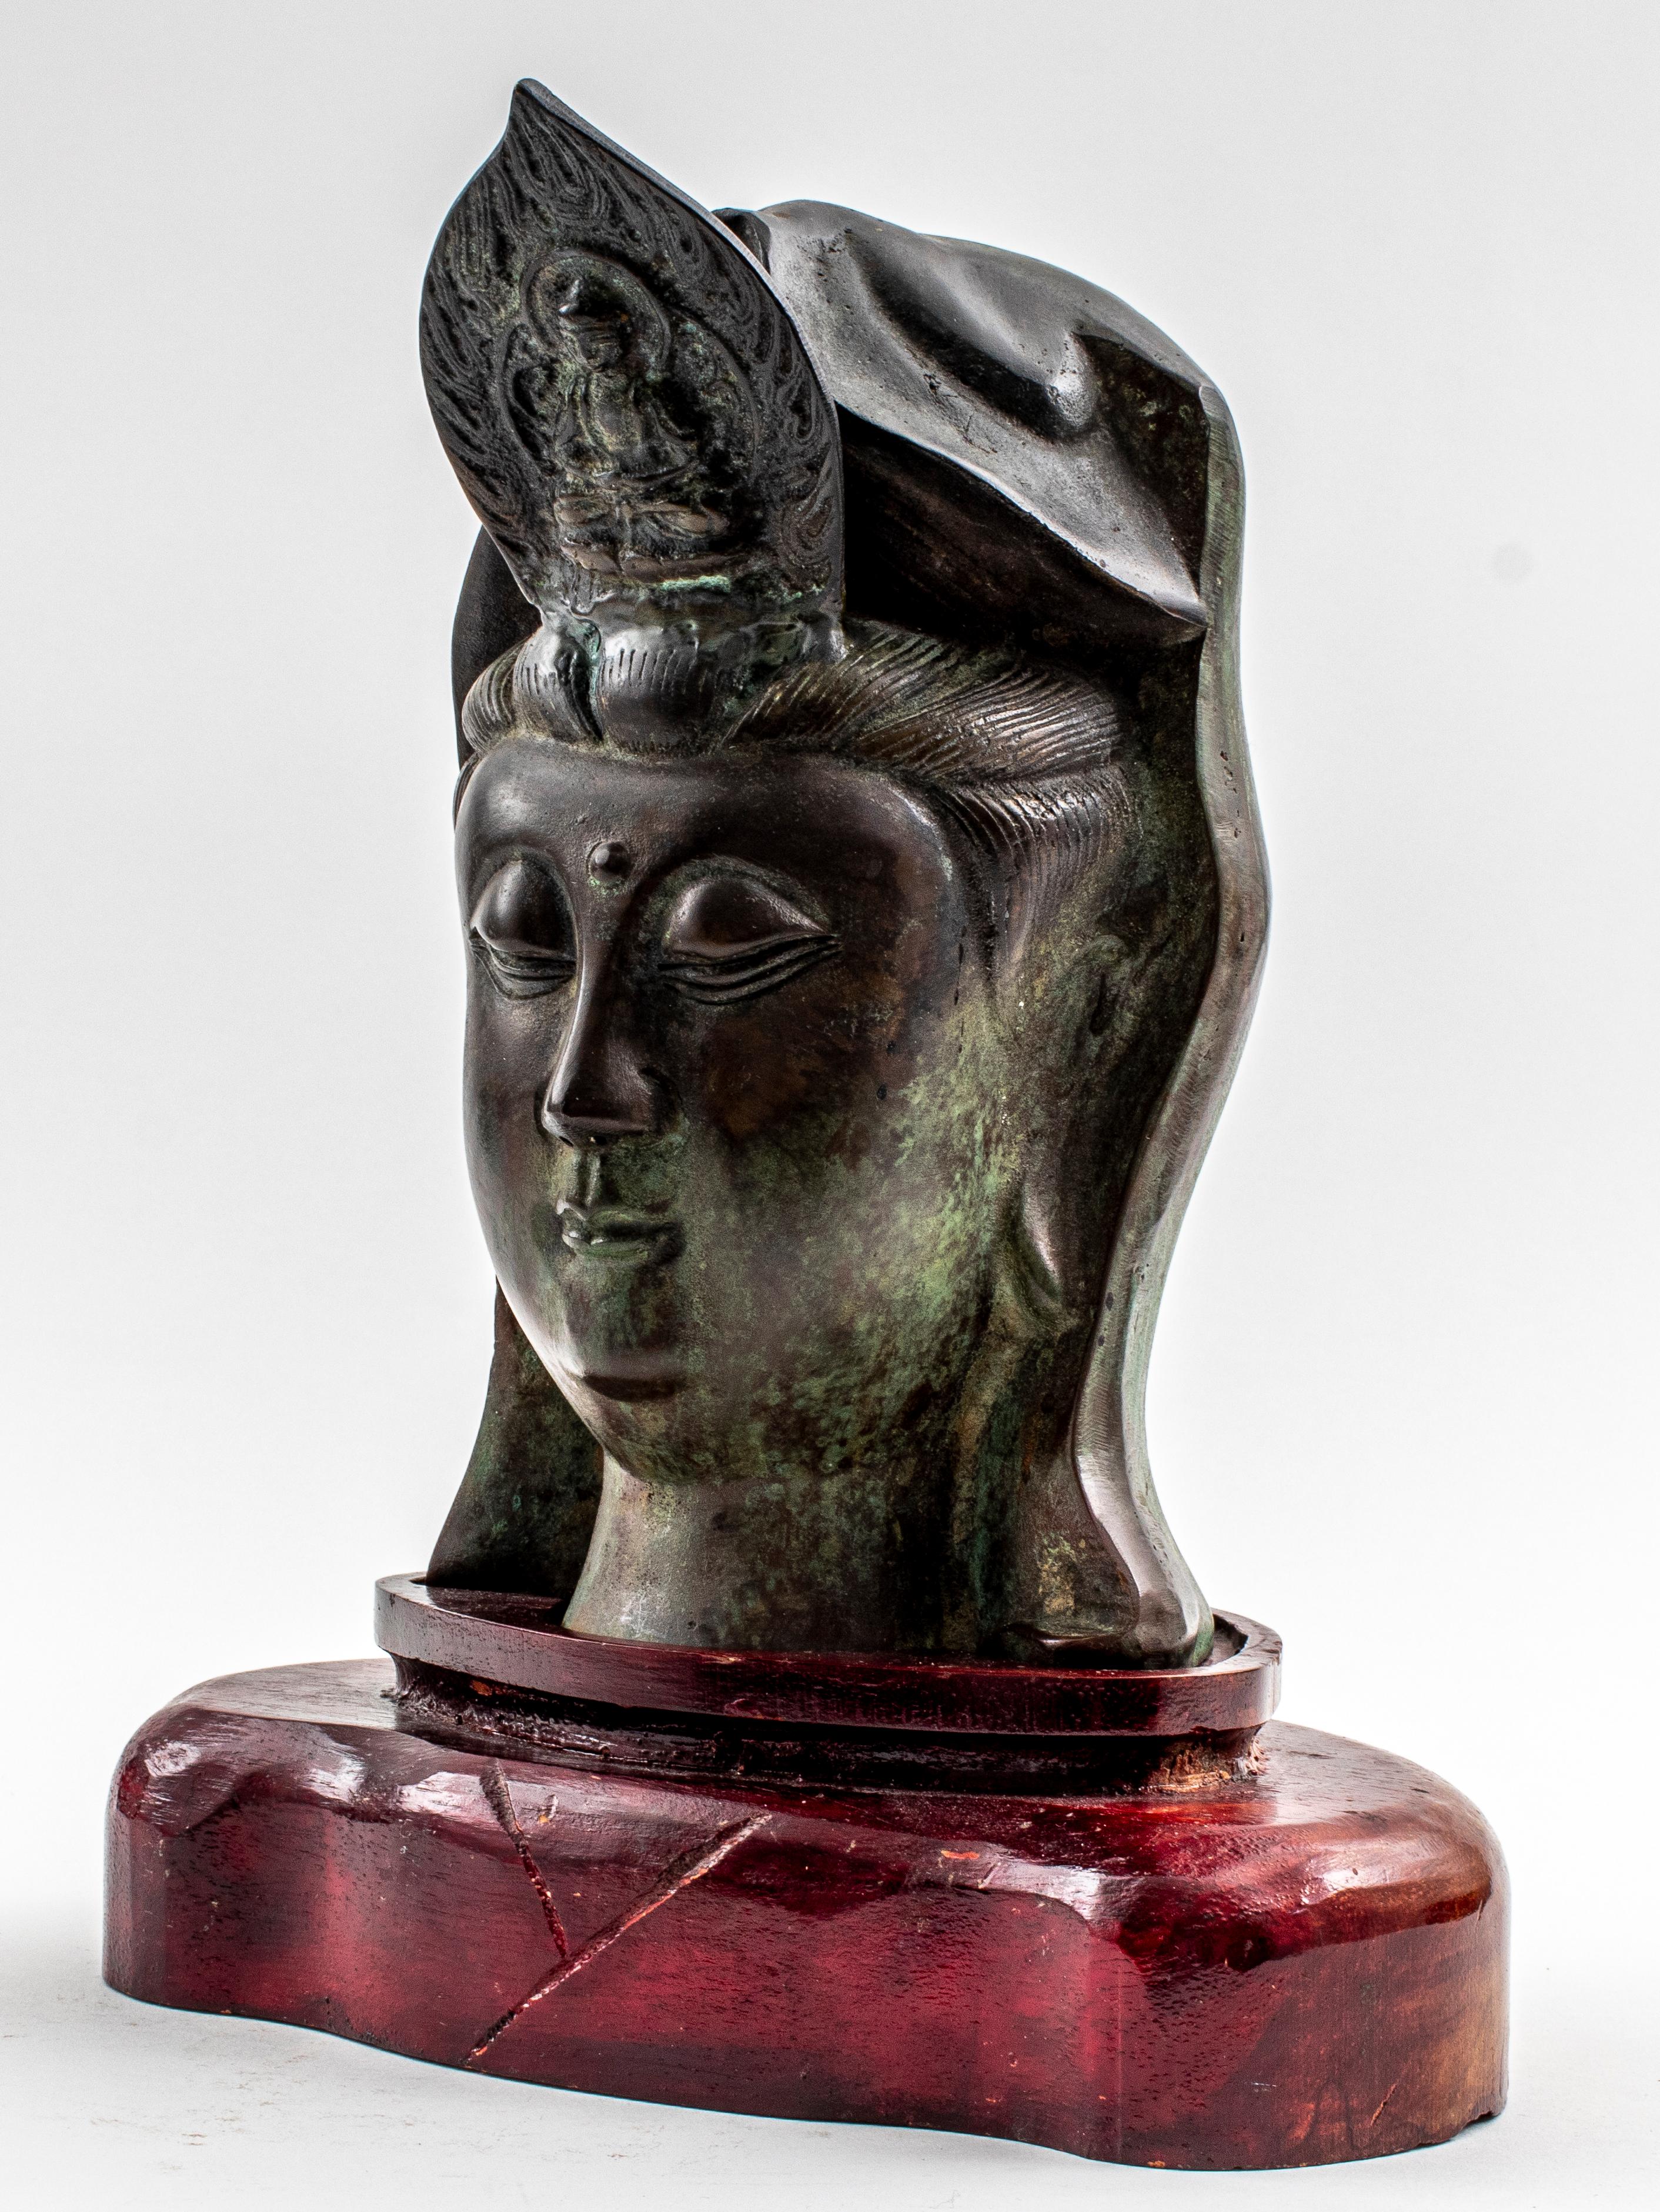 Chinese Guanyin Bodhisattva bronze sculpture, depicting a female head with a crown containing the imagery of the Buddha Amitabha, on wooden stand. 
Measures: 9